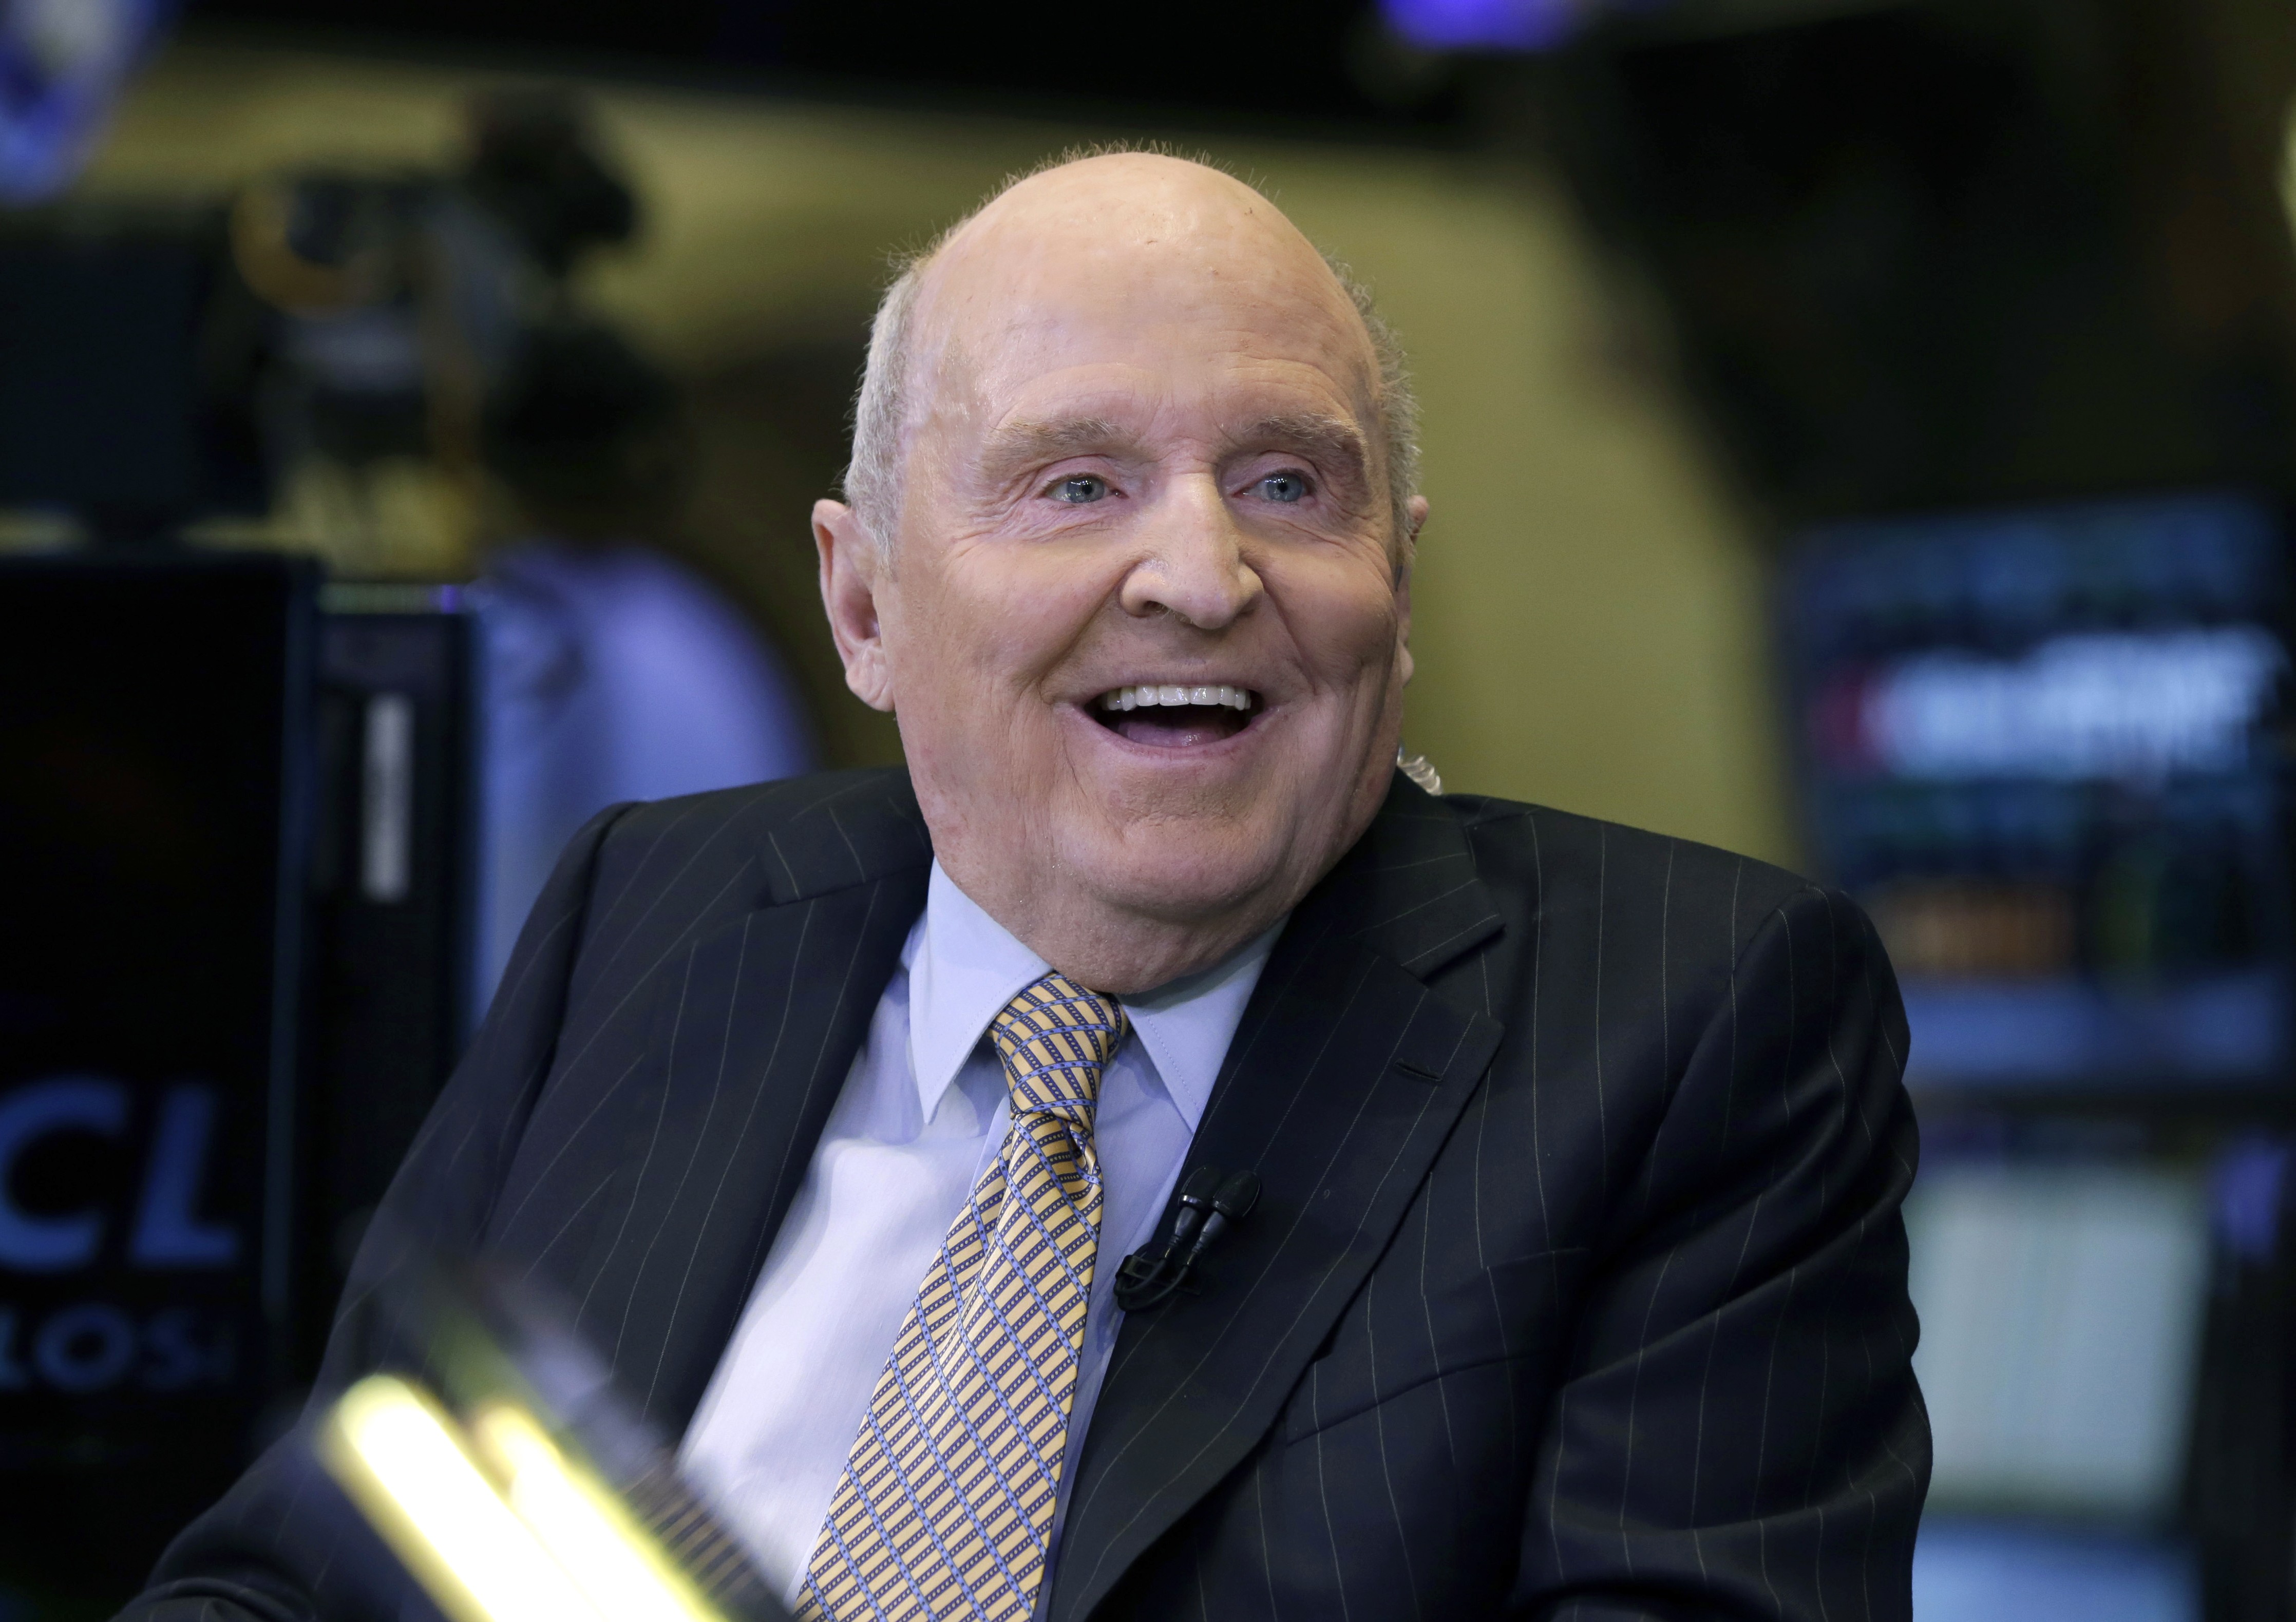 Former General Electric chief executive officer Jack Welch. Photo: AP